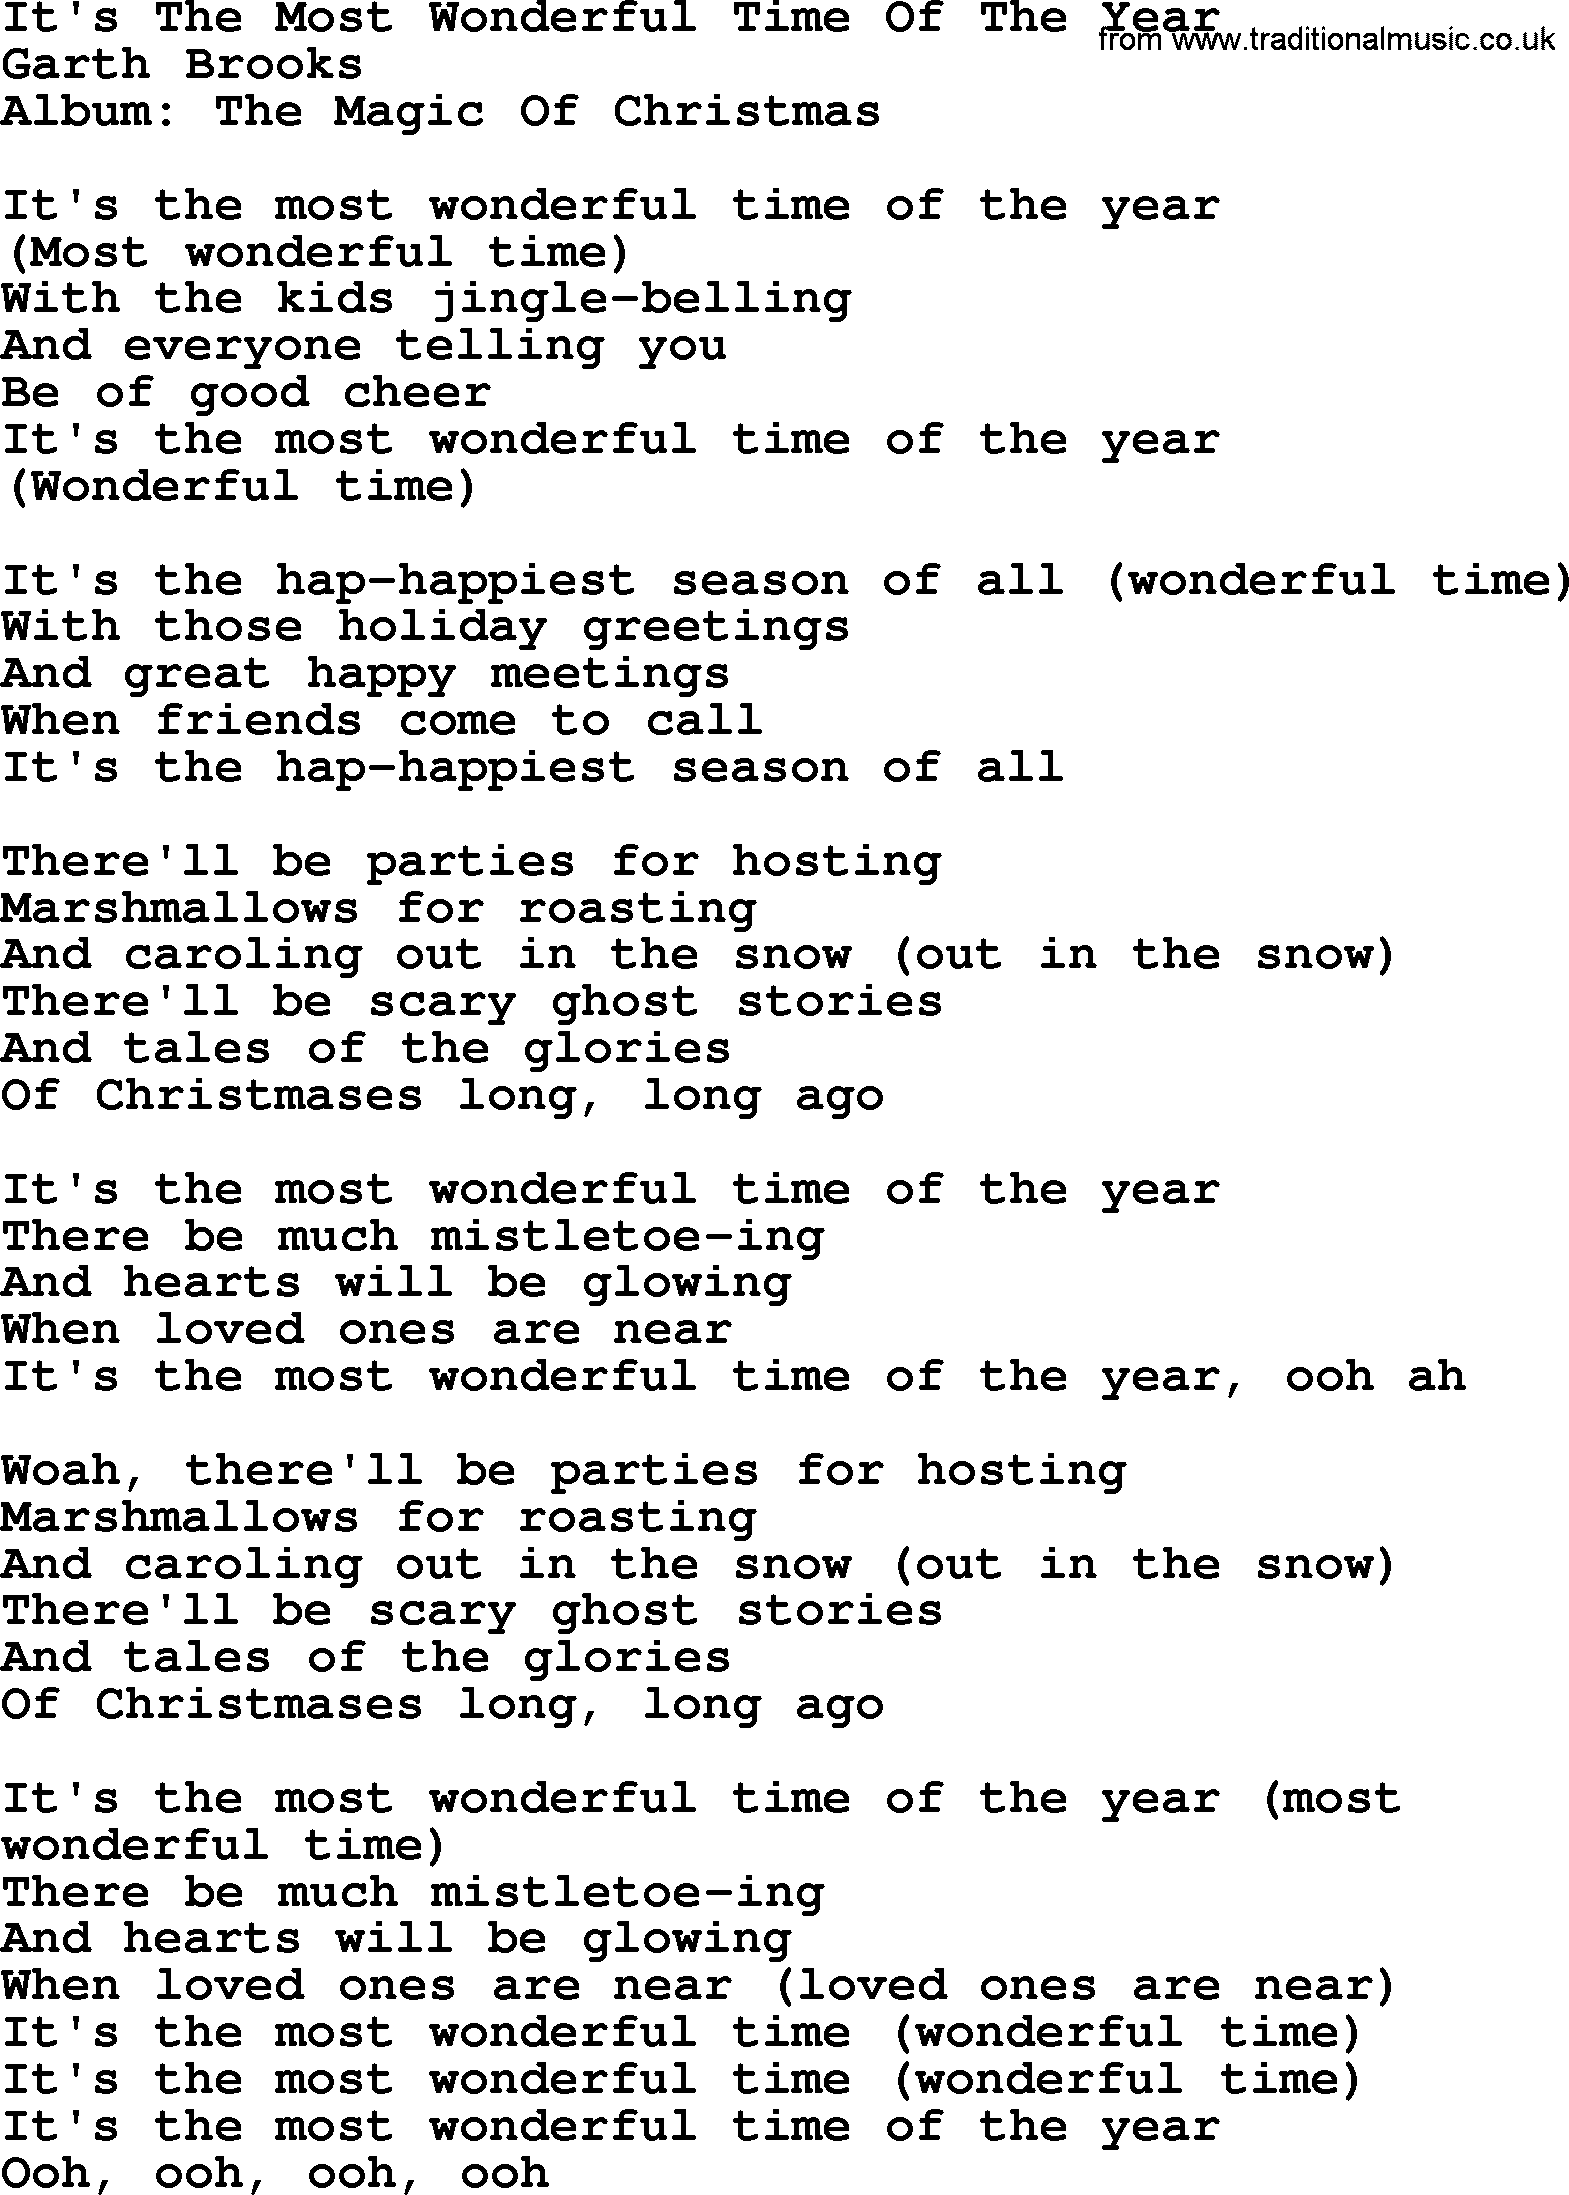 Garth Brooks song: It's The Most Wonderful Time Of The Year, lyrics